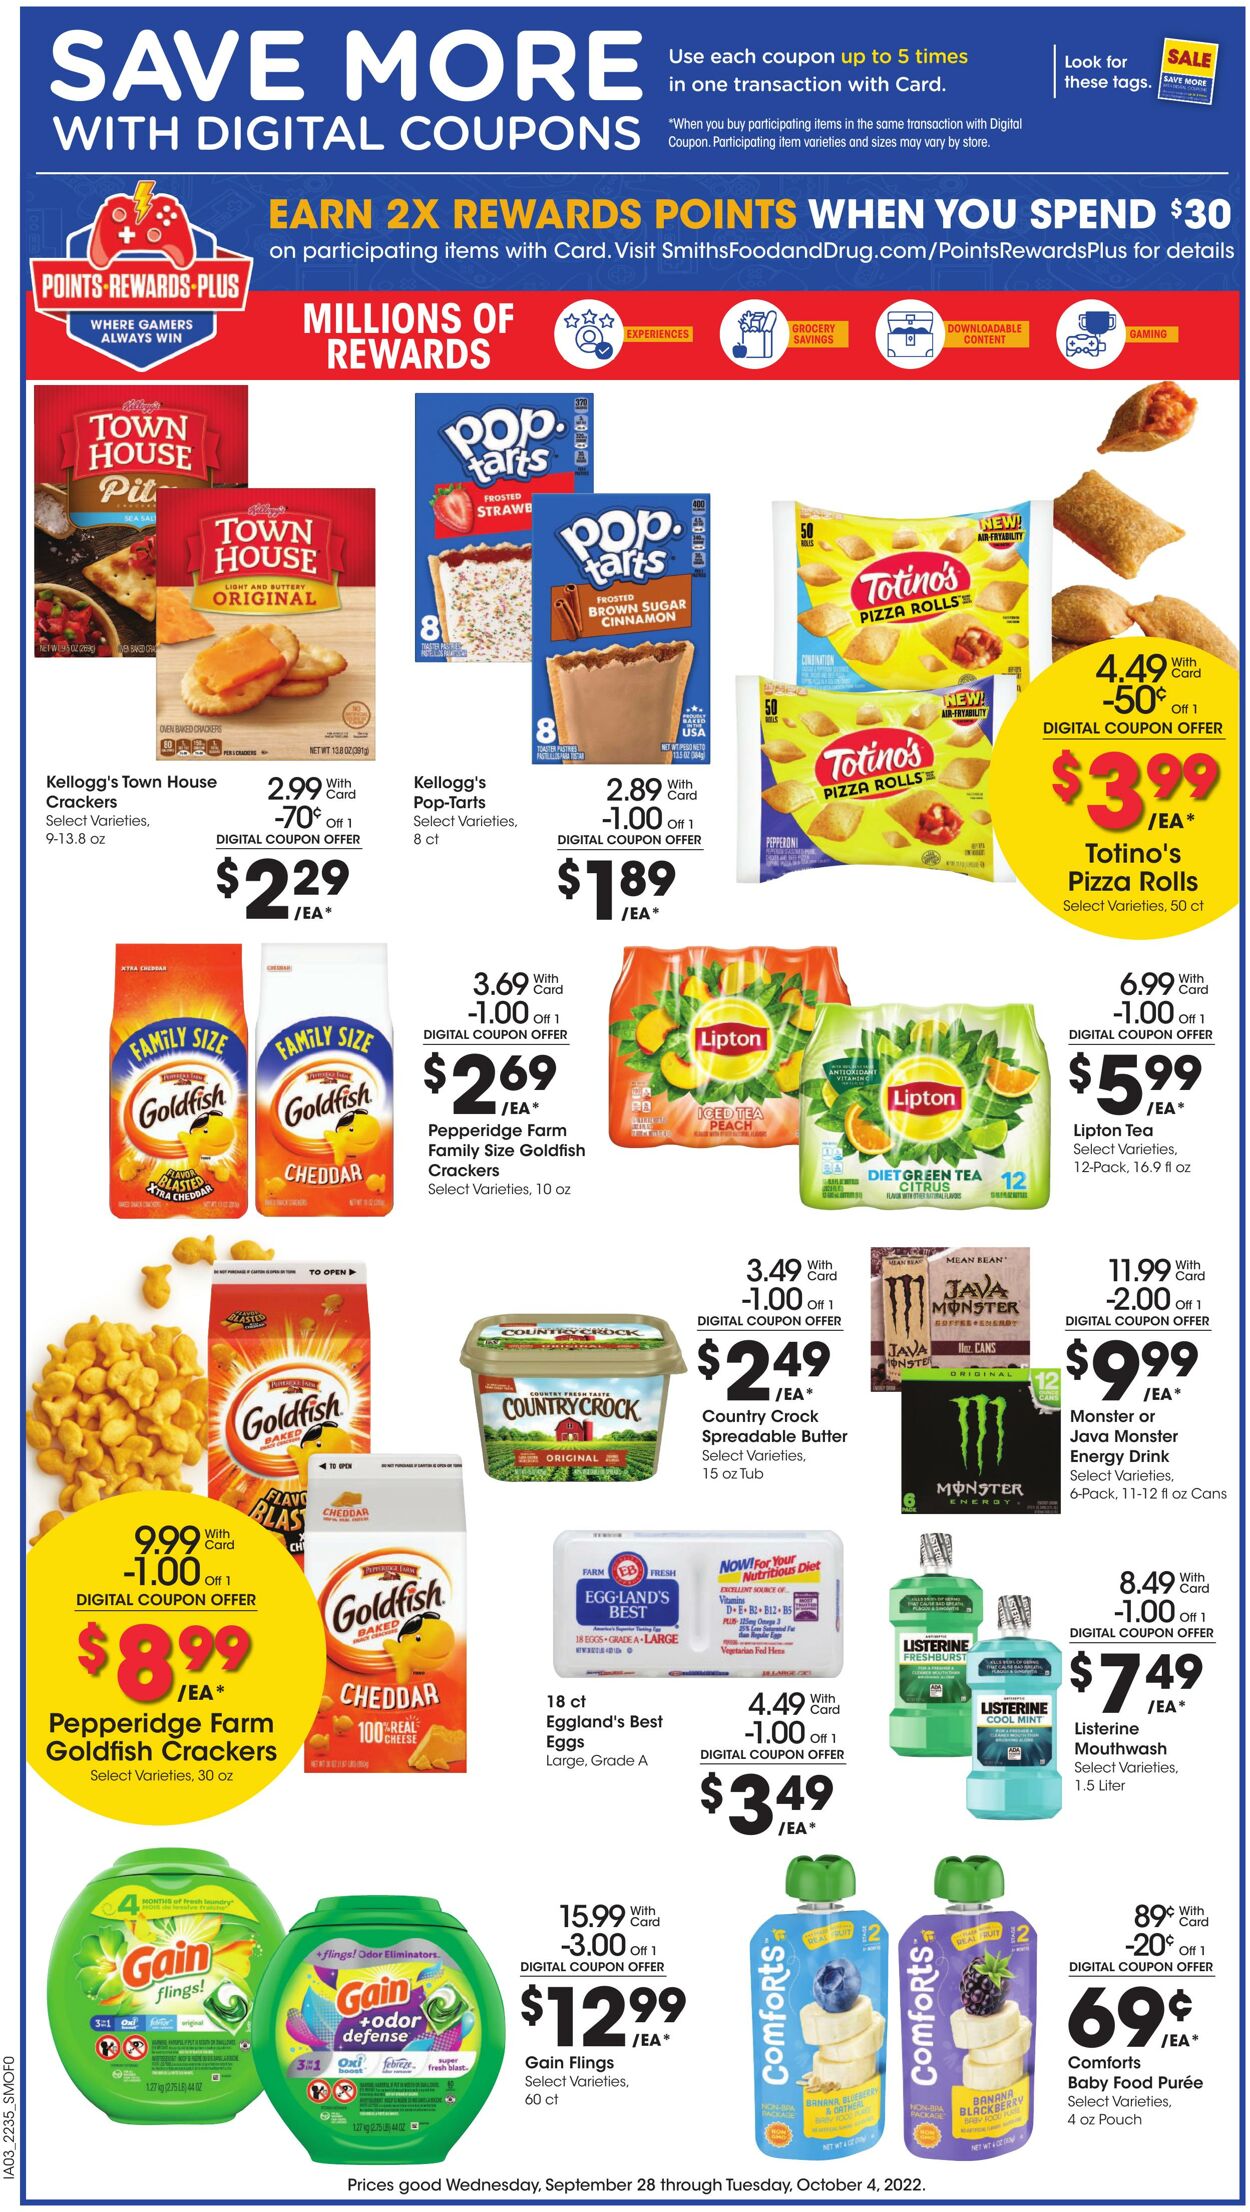 Weekly ad Smith’s Food and Drug 09/28/2022 - 10/04/2022